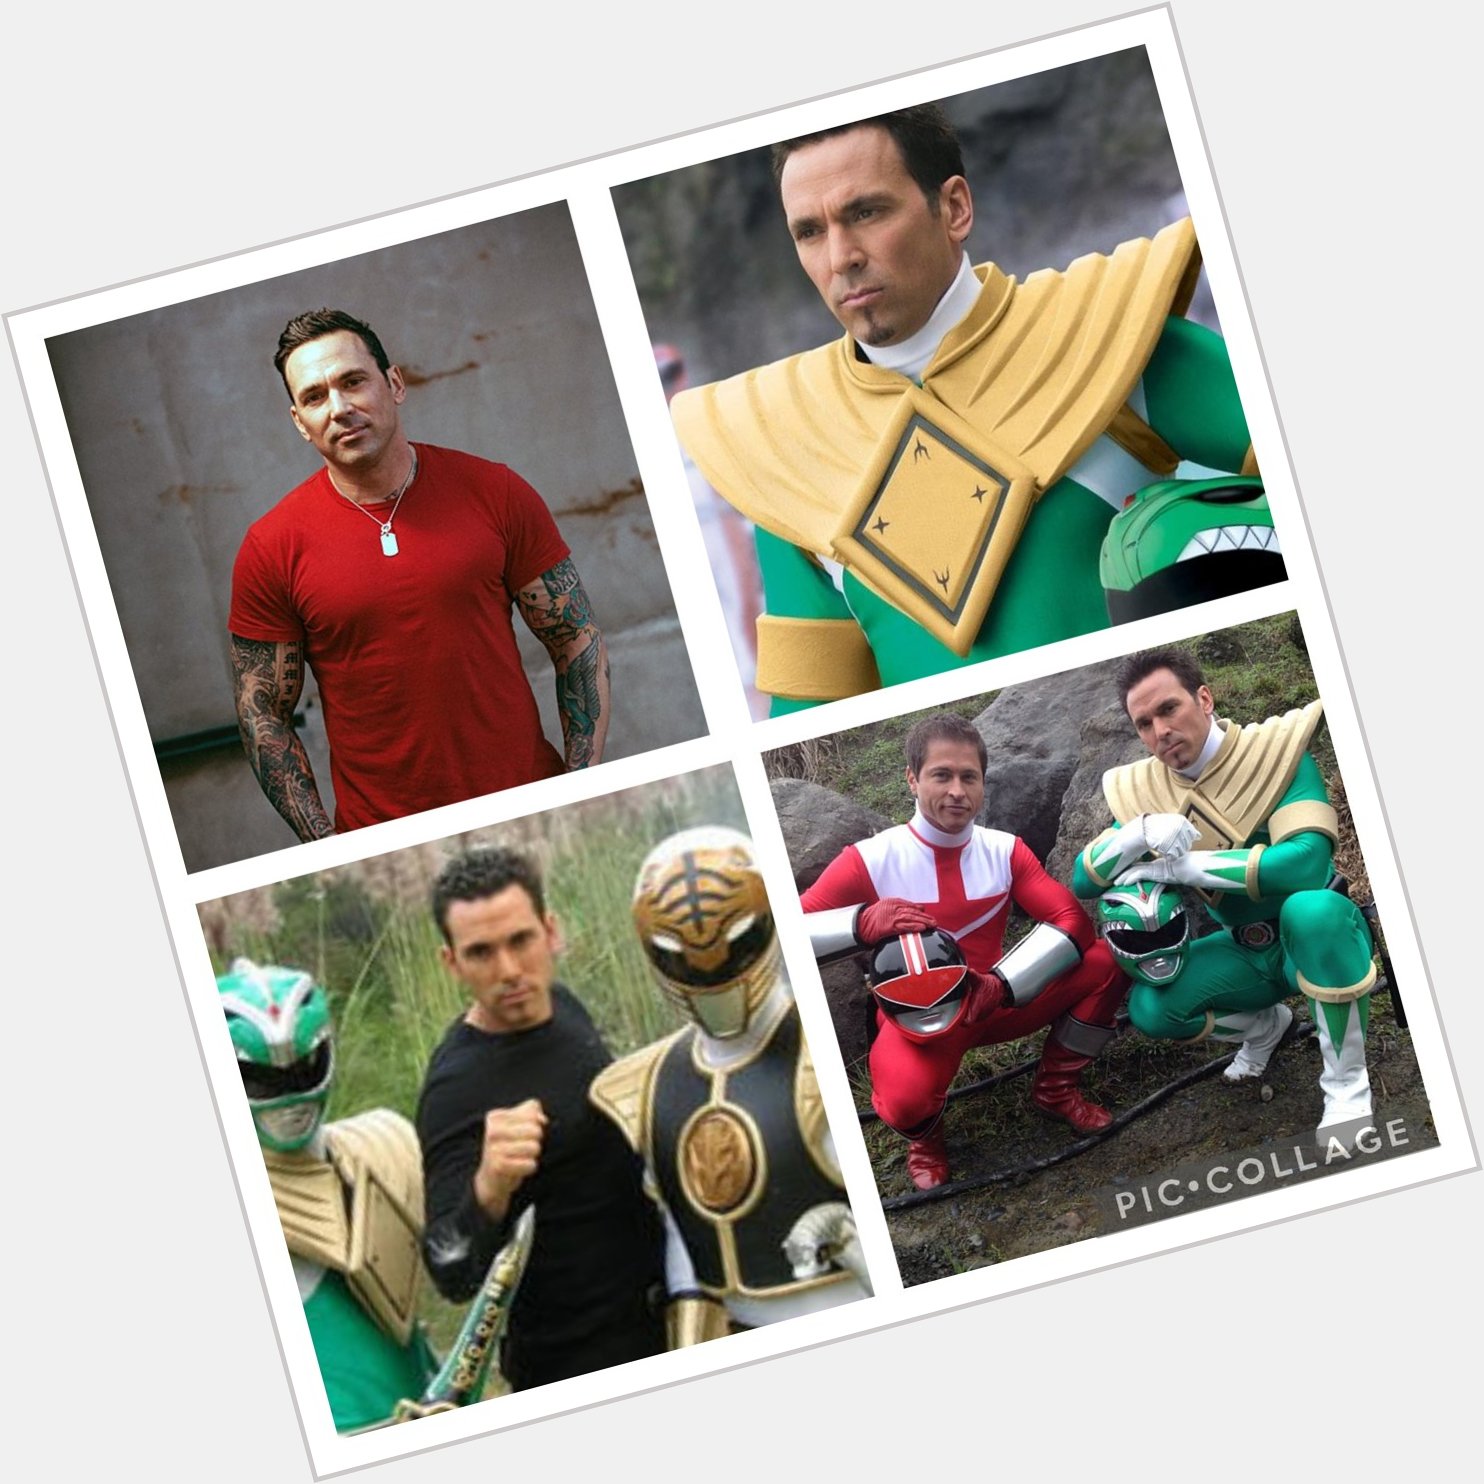 Wanted to wish a Happy Birthday to Jason David Frank aka Tommy the original Green and White Ranger.  